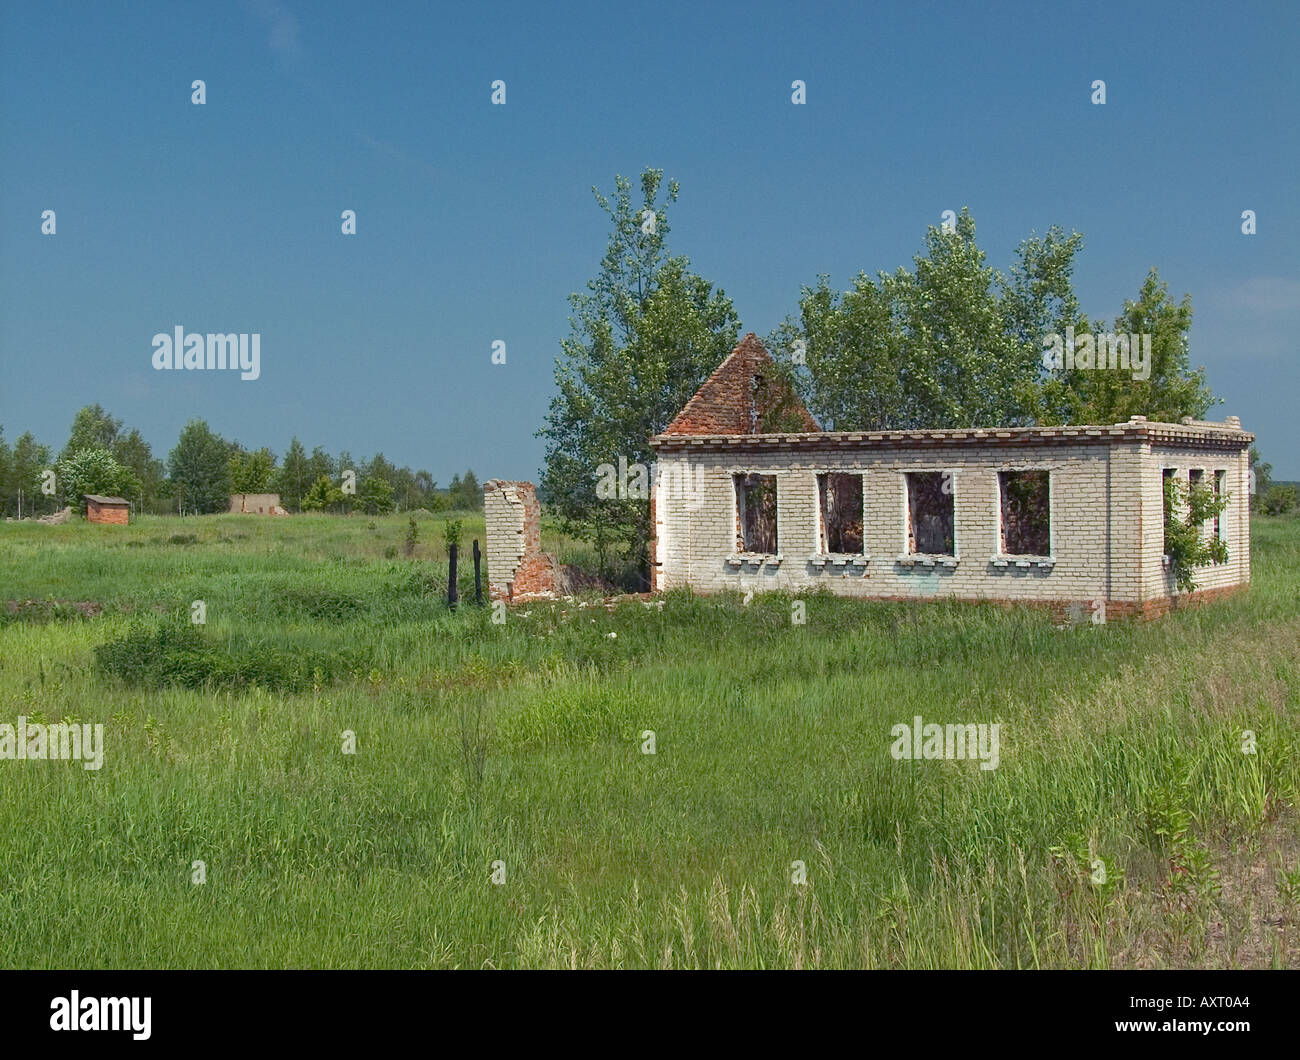 Derelict property with missing roof and distant outbuildings in lush pastoral landscape, Chernobyl exclusion zone, Belarus Ukraine state border Stock Photo